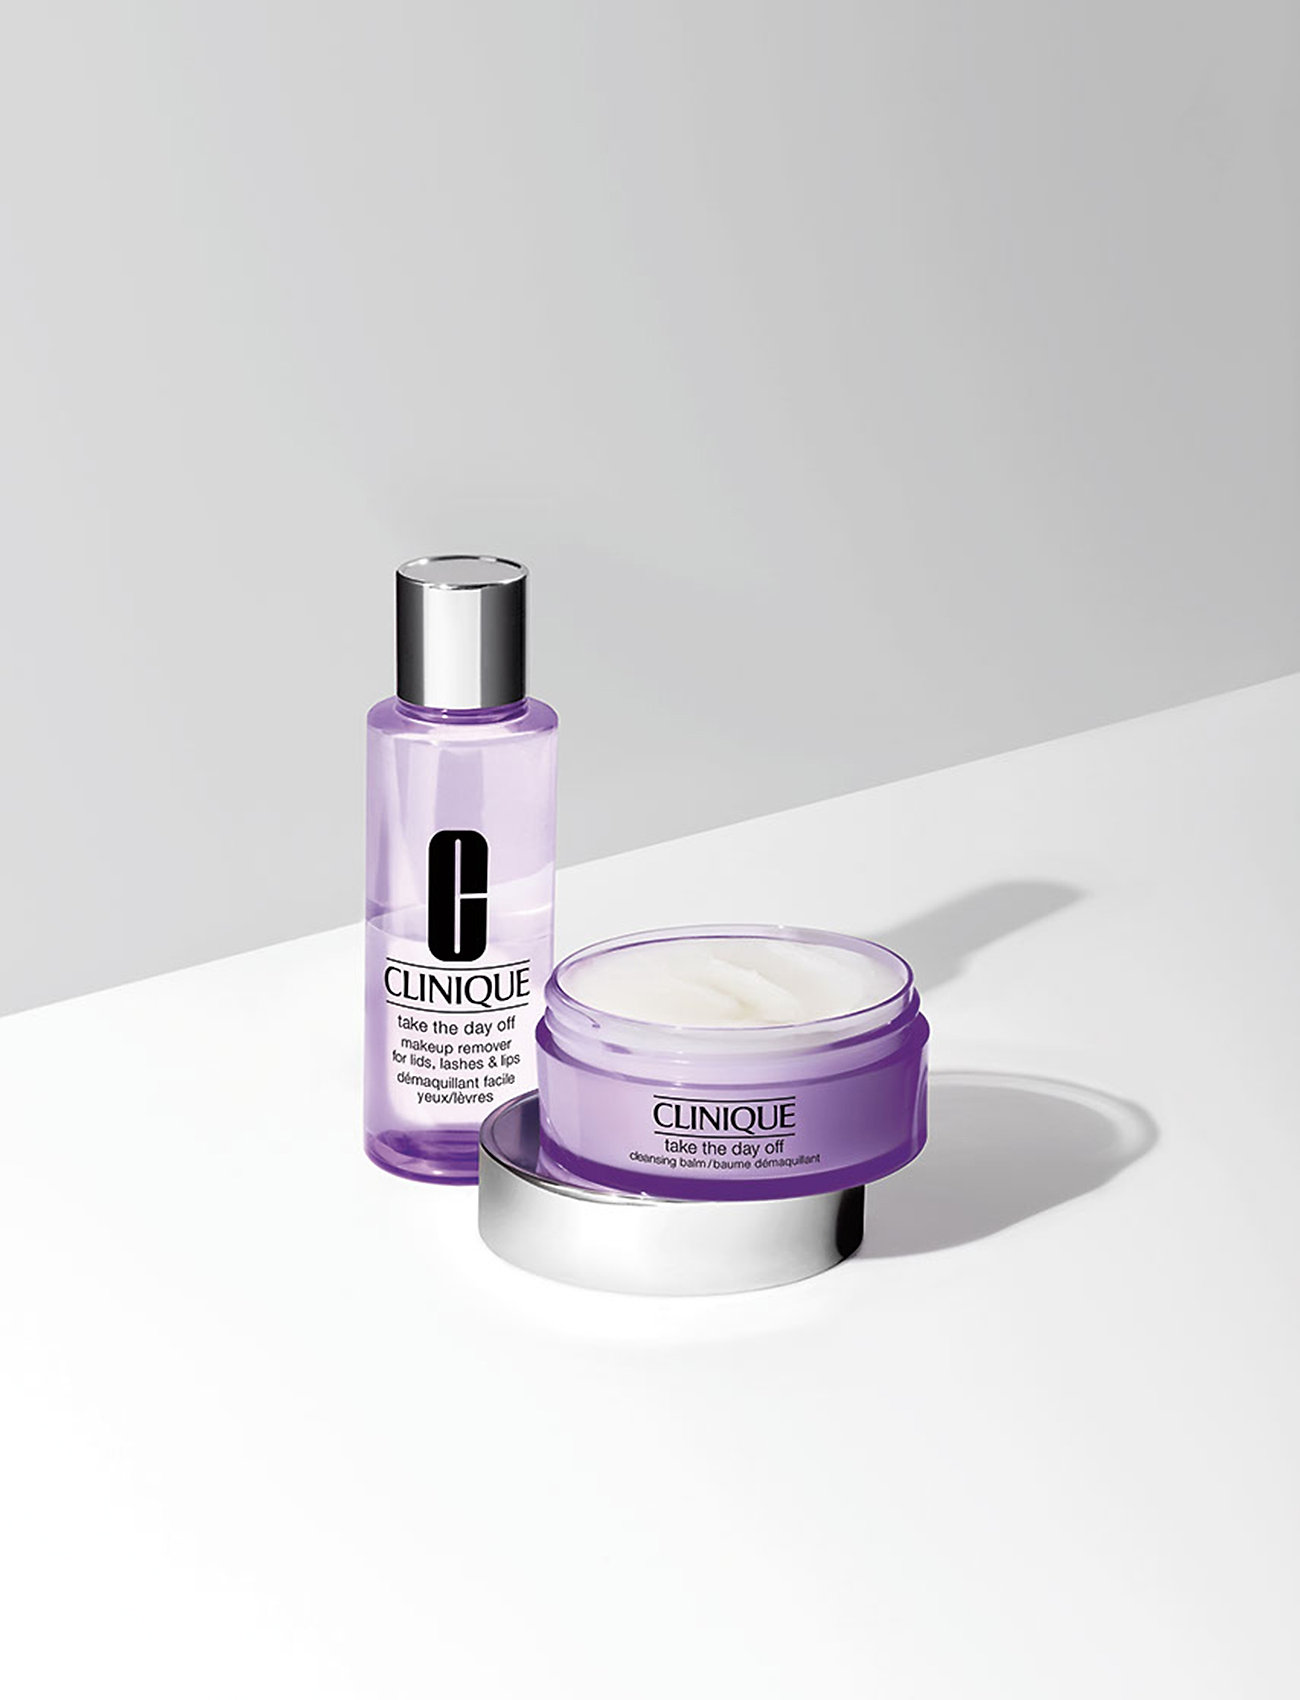 clinique take the day off cleansing balm ingredients - Online Discount Shop  for Electronics, Apparel, Toys, Books, Games, Computers, Shoes, Jewelry,  Watches, Baby Products, Sports &amp; Outdoors, Office Products, Bed &amp; Bath,